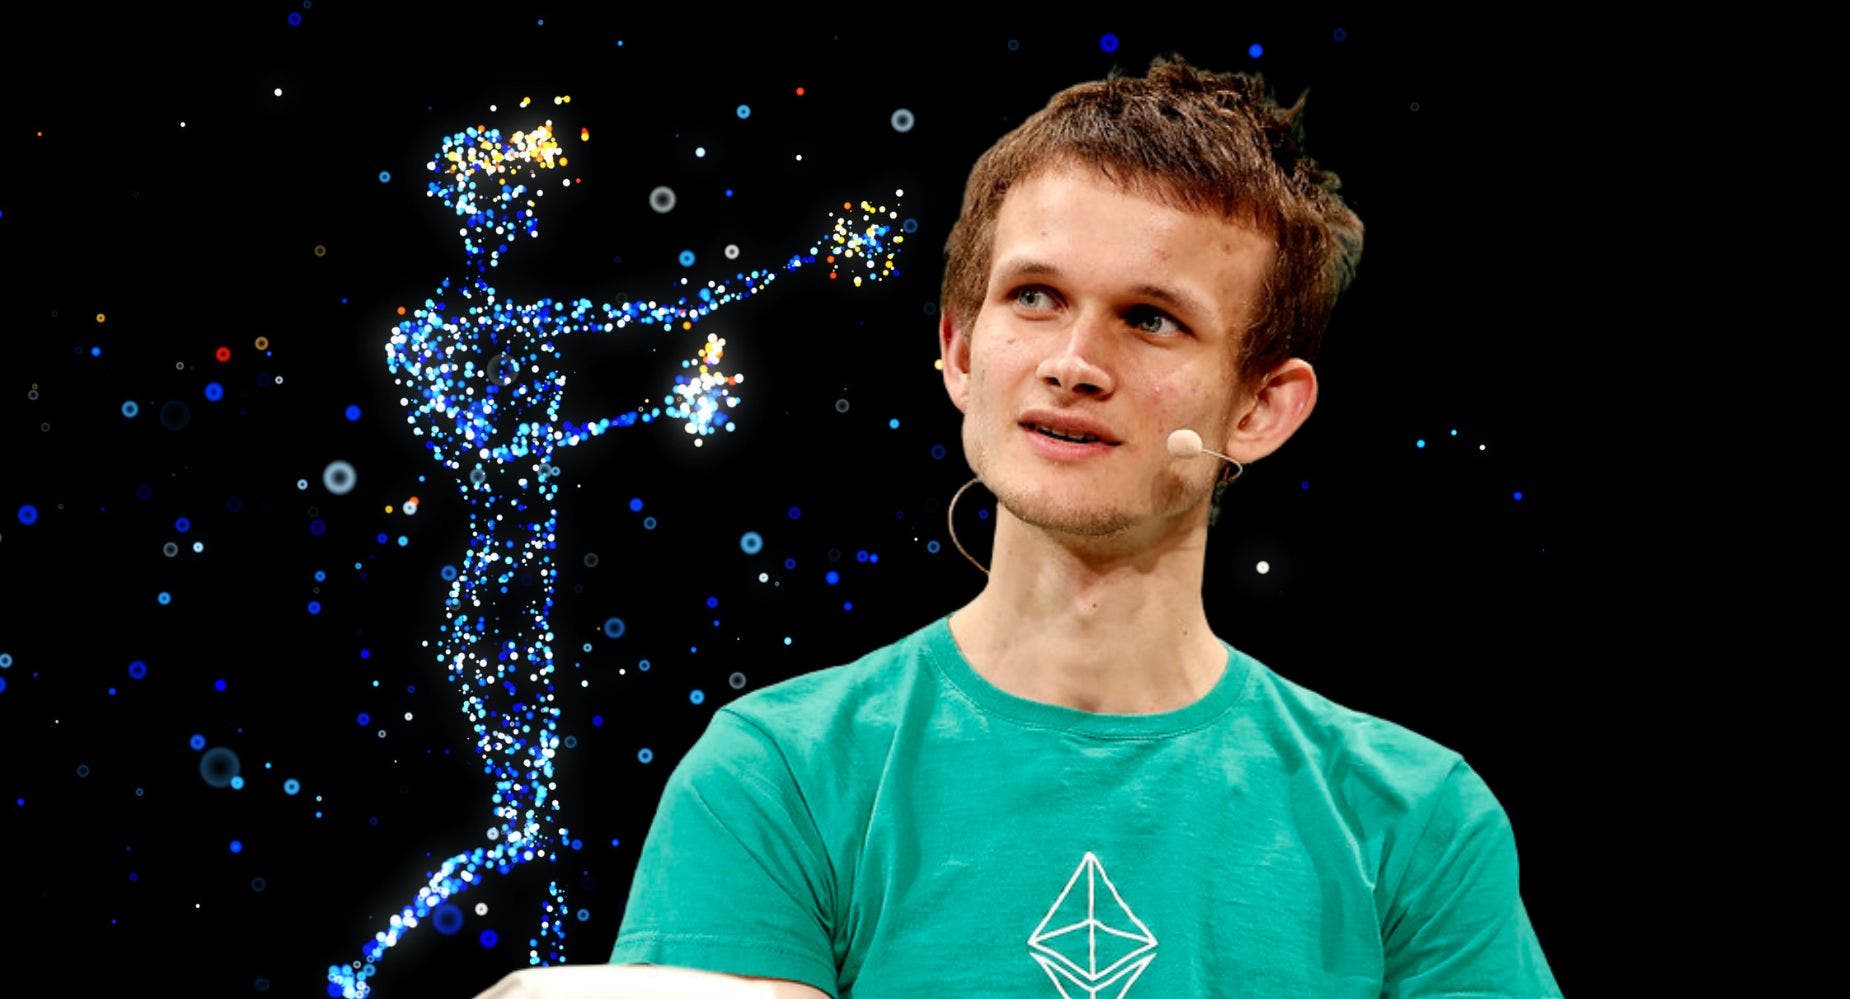 Why Ethereum's Vitalik Buterin Says Corporate Metaverse Efforts Will Fail: 'Anything Facebook Creates Now Will Misfire'